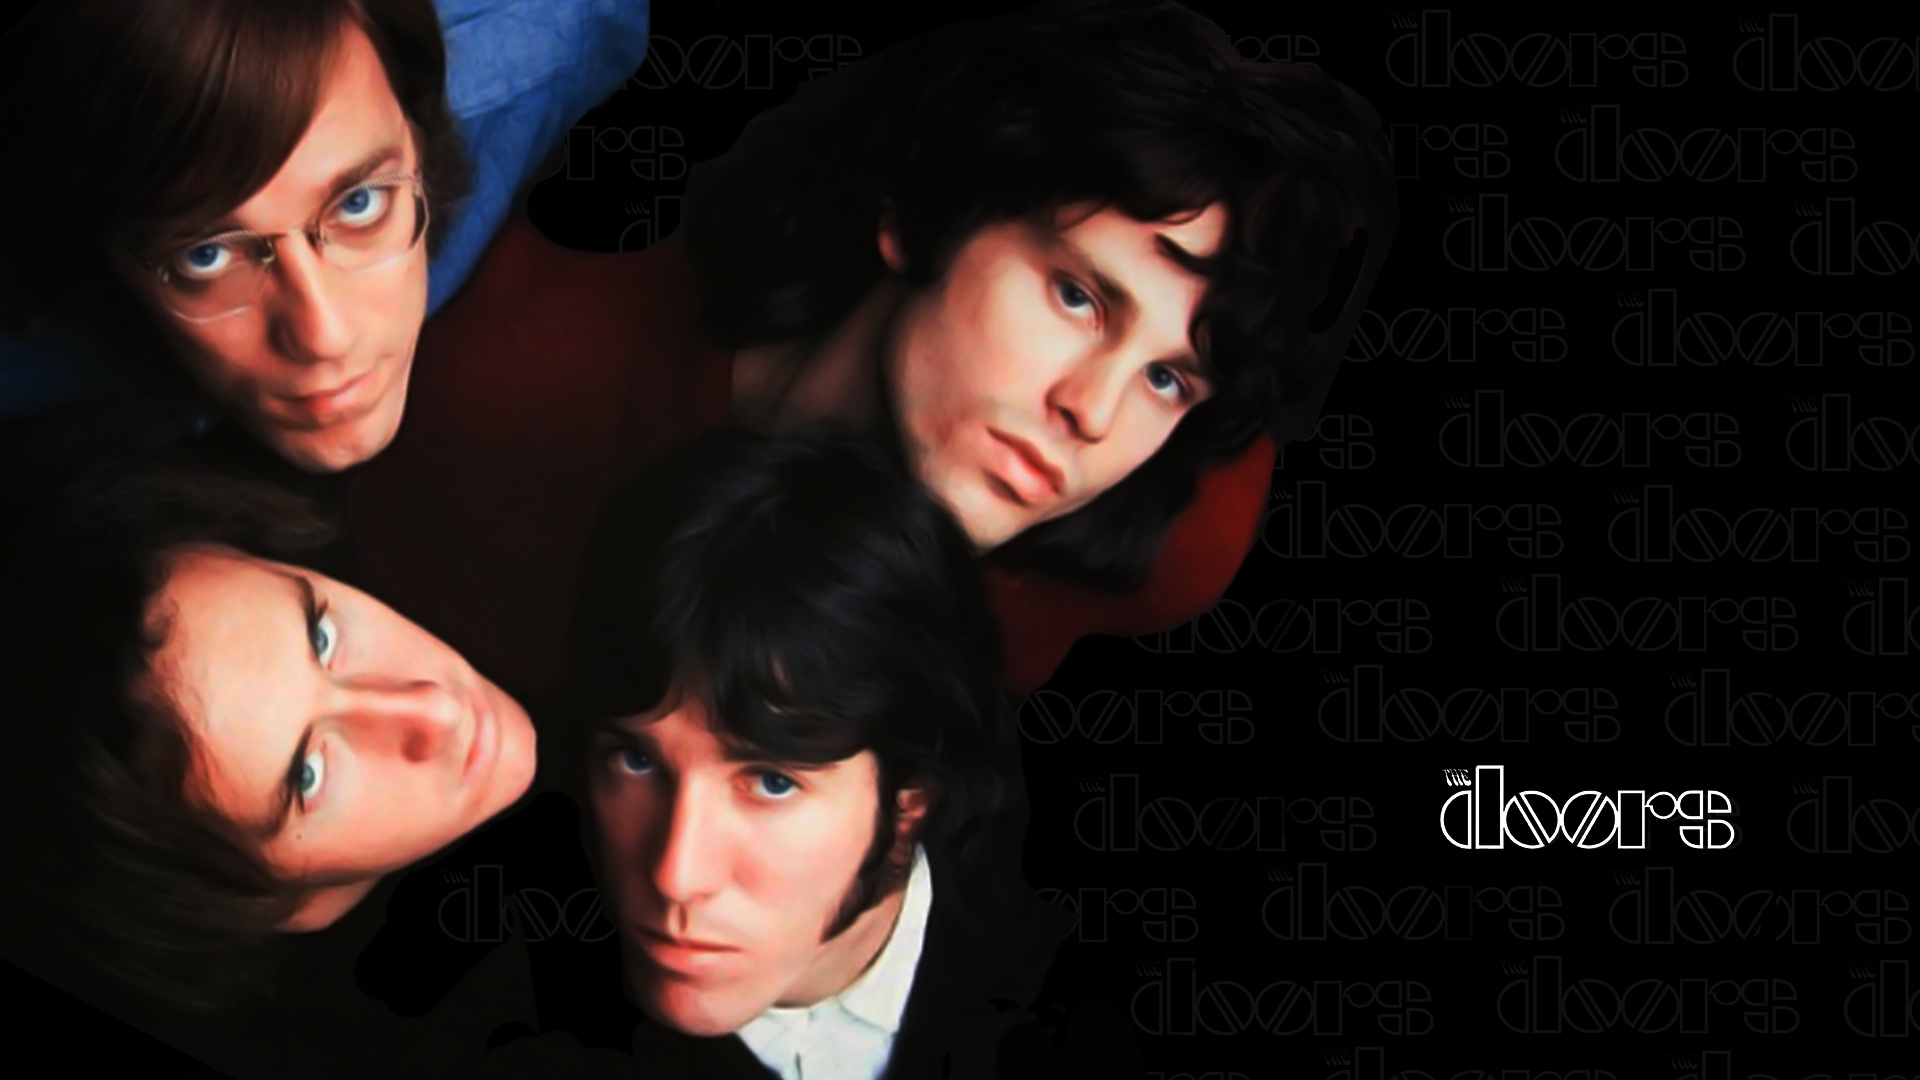 The Doors band, Free backgrounds, The Doors wallpapers, Band music, 1920x1080 Full HD Desktop